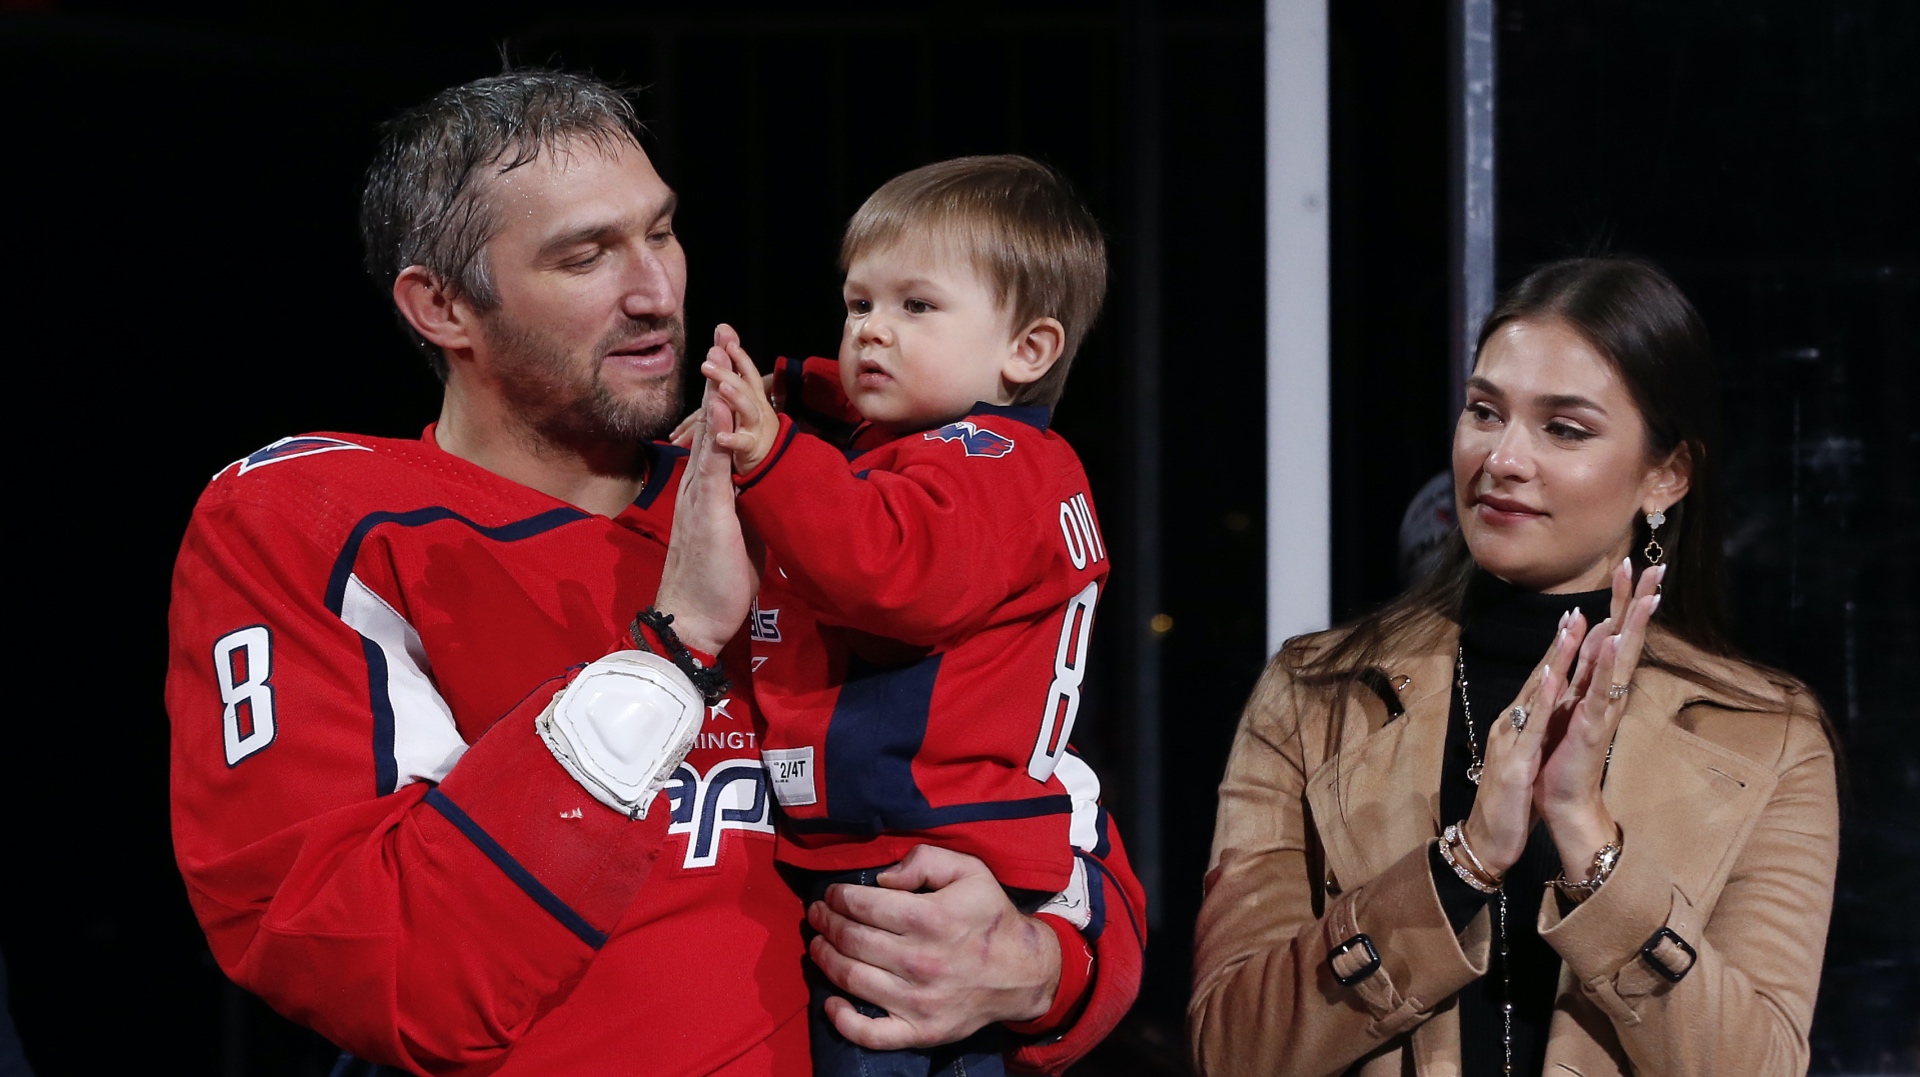 SEE IT: Sergei Ovechkin Takes the Ice With His Dad